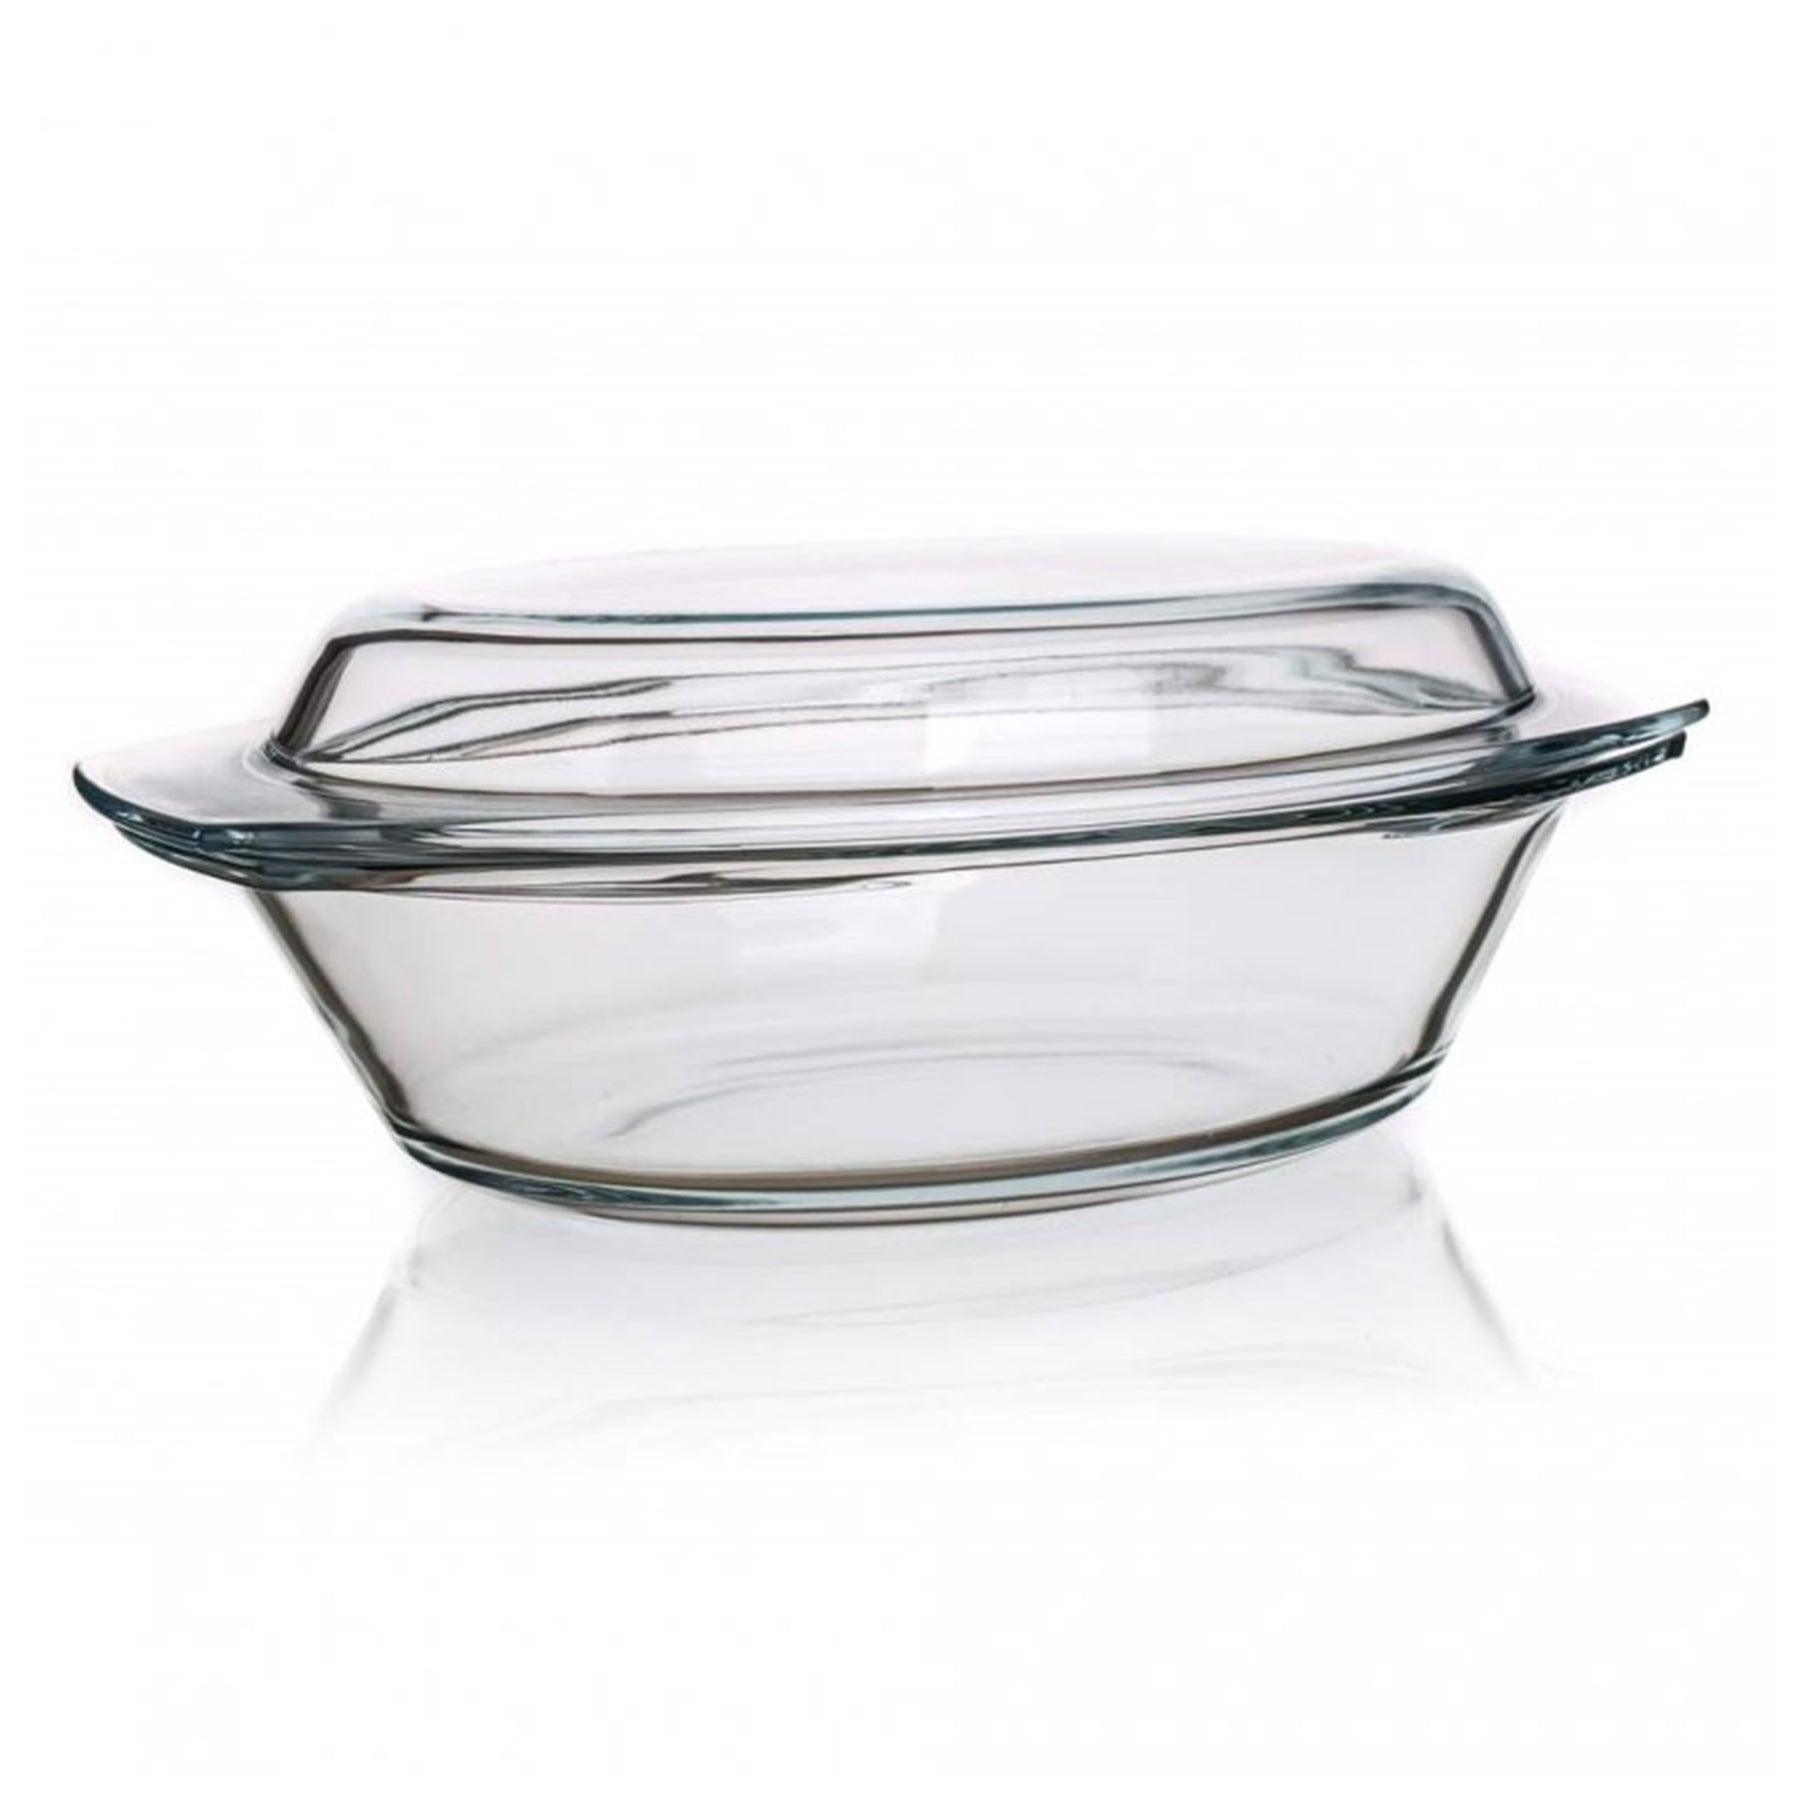 2 Pcs Oval casserole with lid, Clear